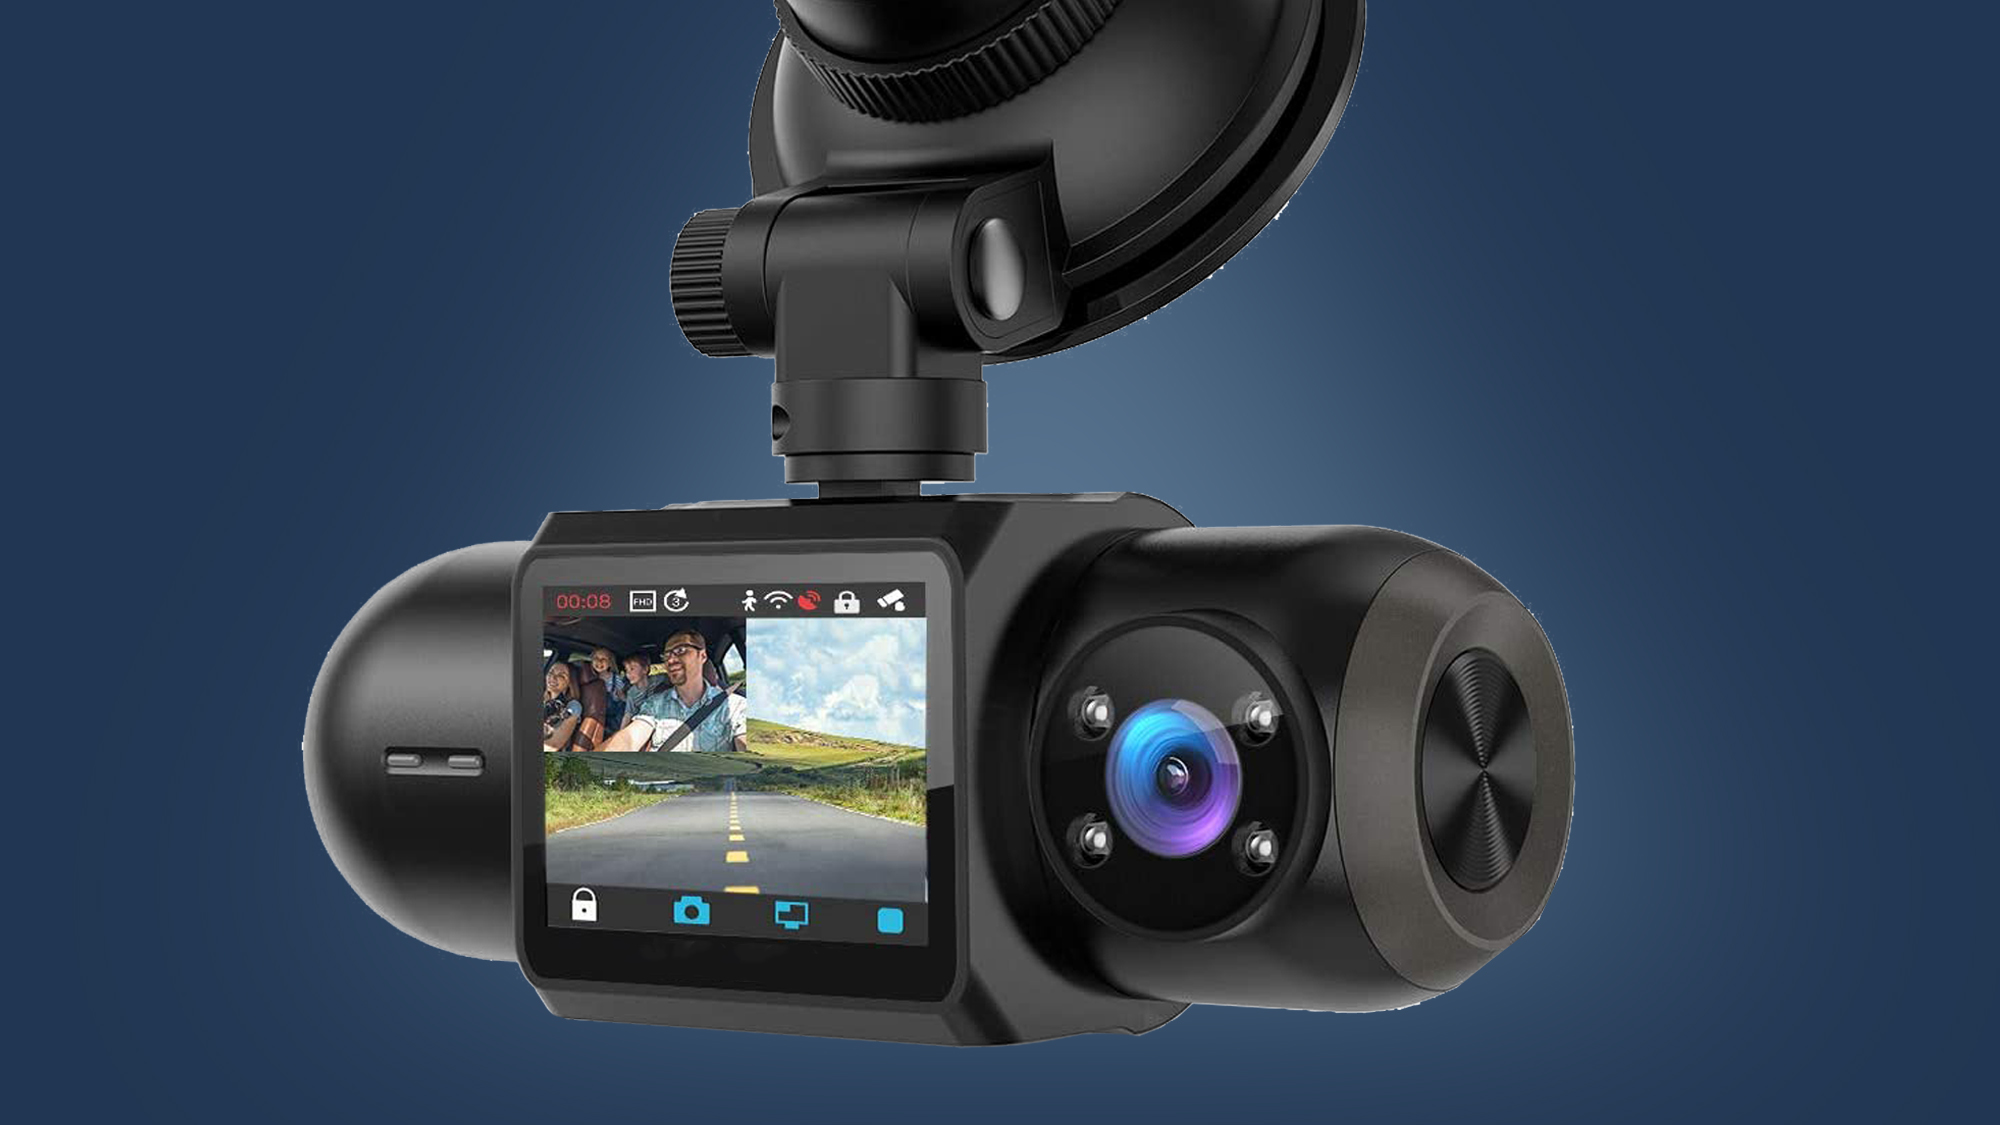 The COOAU dash cam on a blue background